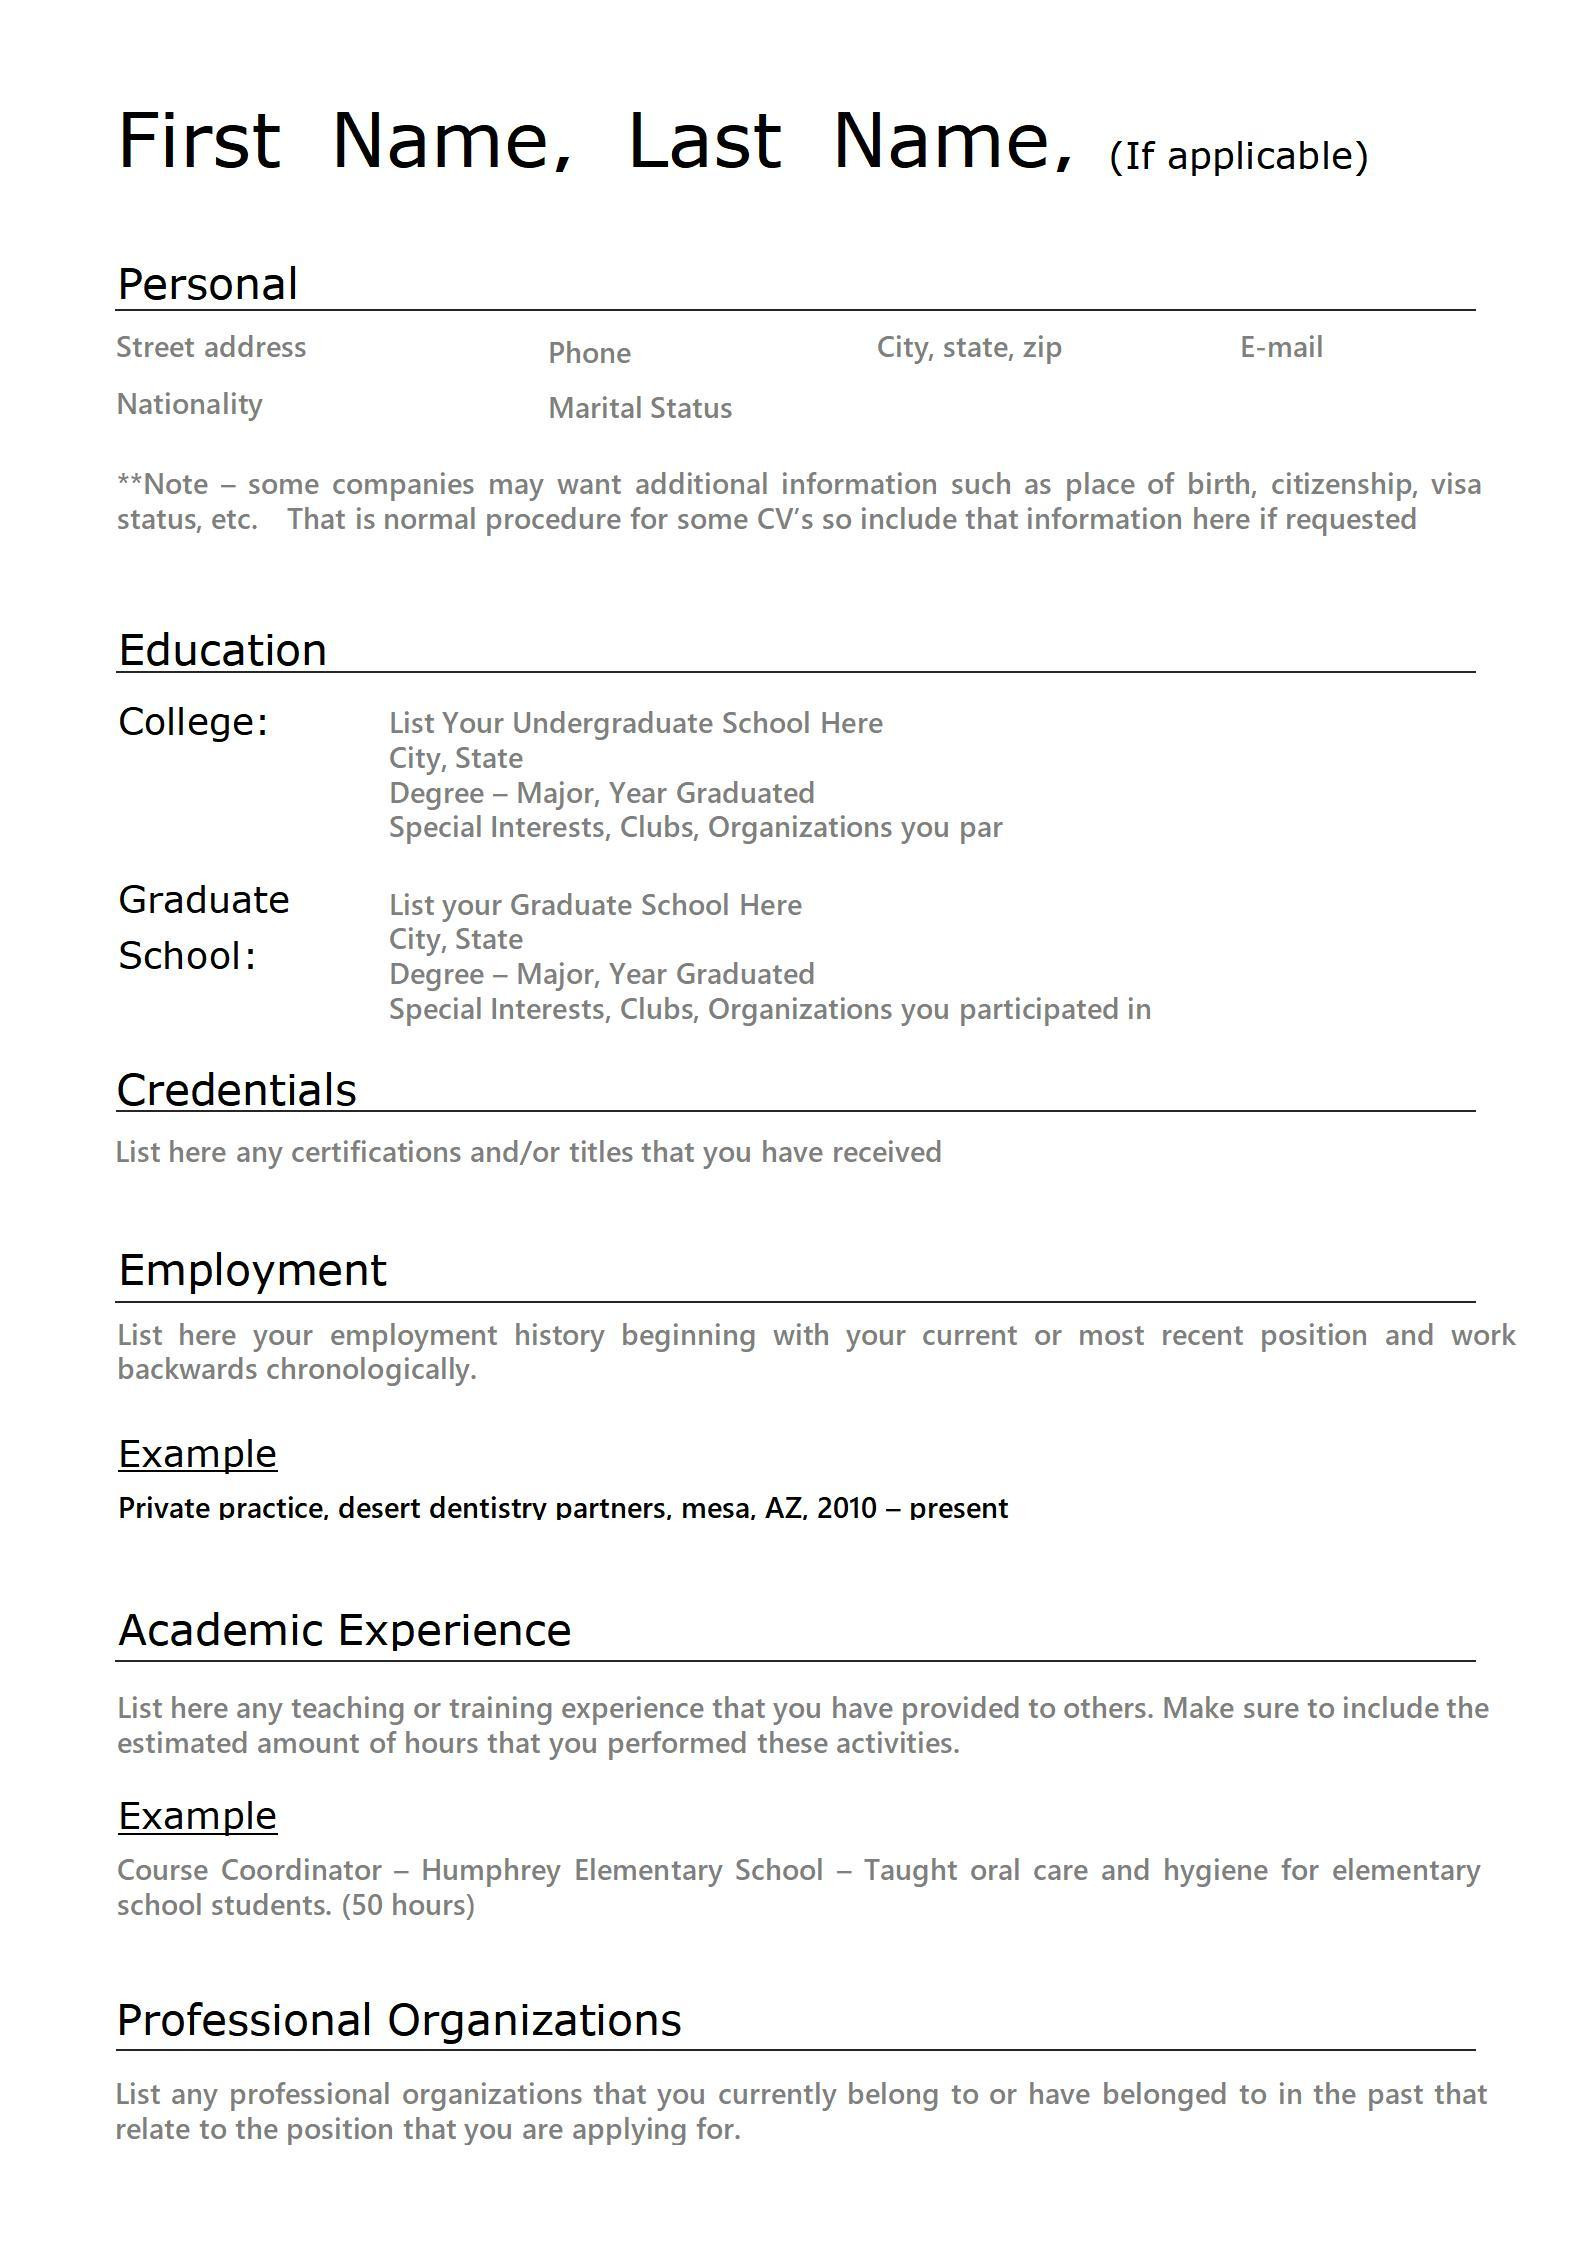 Sample Resume for High School Graduate without Experience First-time Resume with No Experience Samples Wps Office Academy